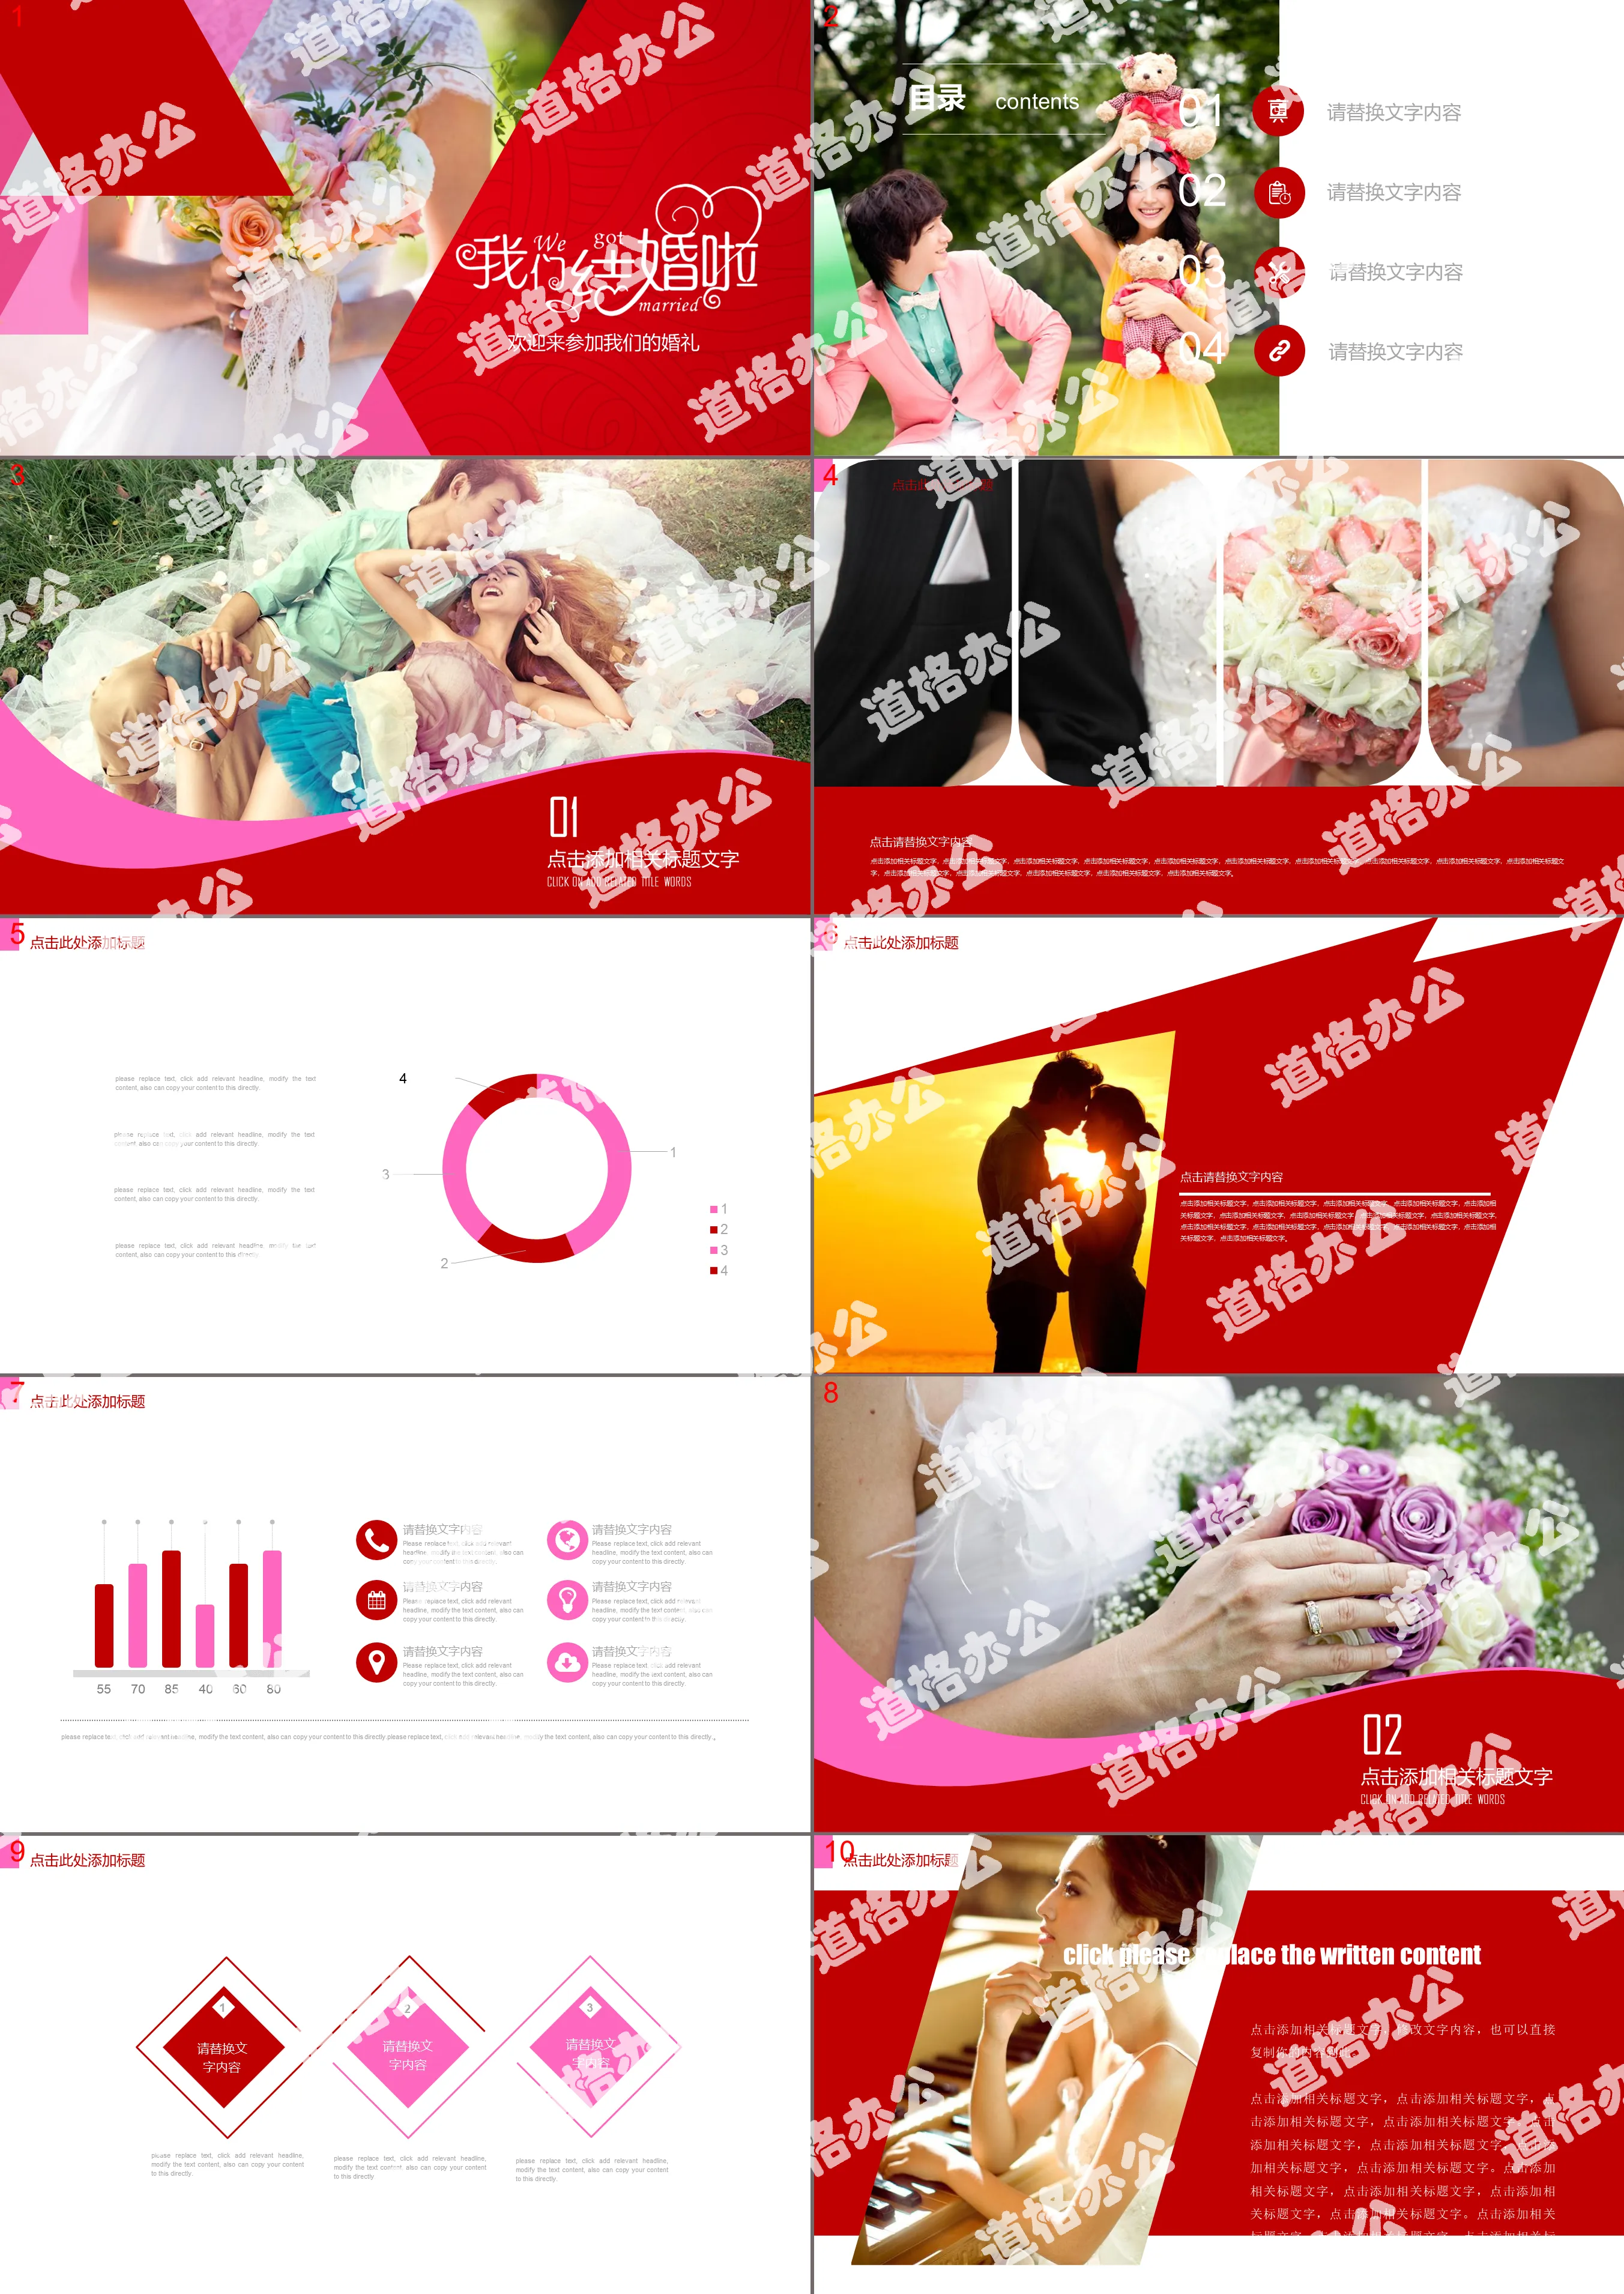 We are married, romantic wedding celebration PPT template